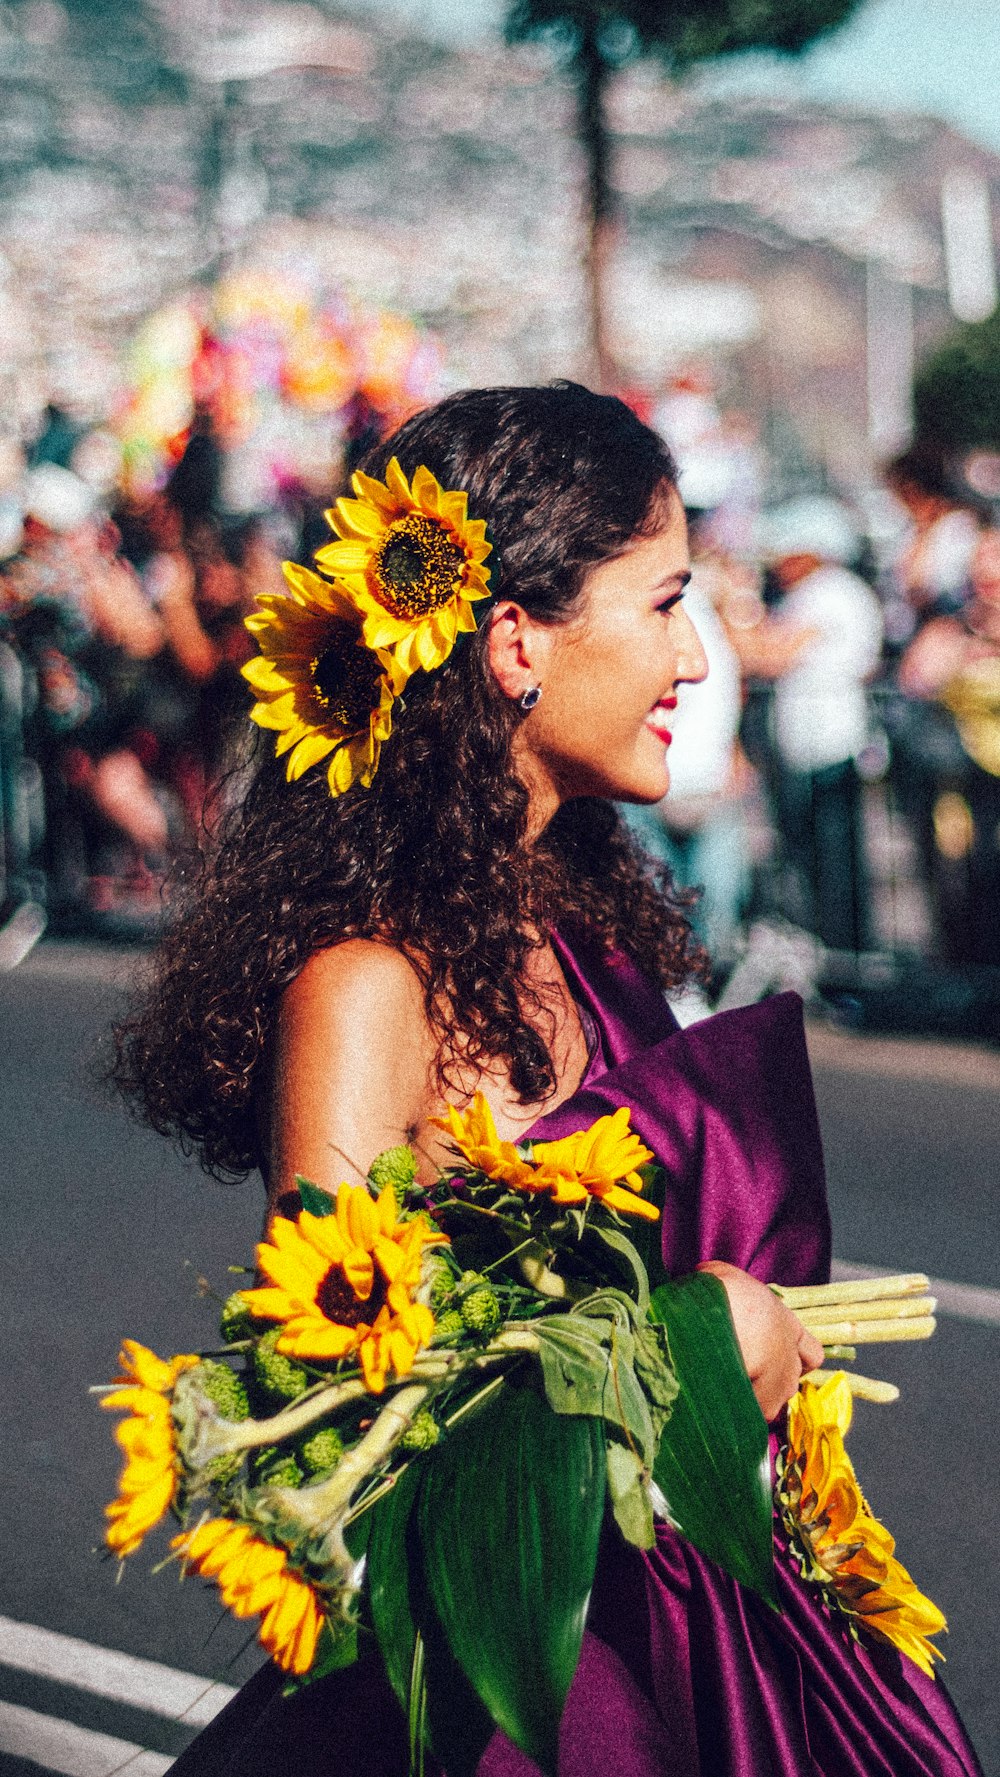 a woman in a purple dress holding a bouquet of sunflowers